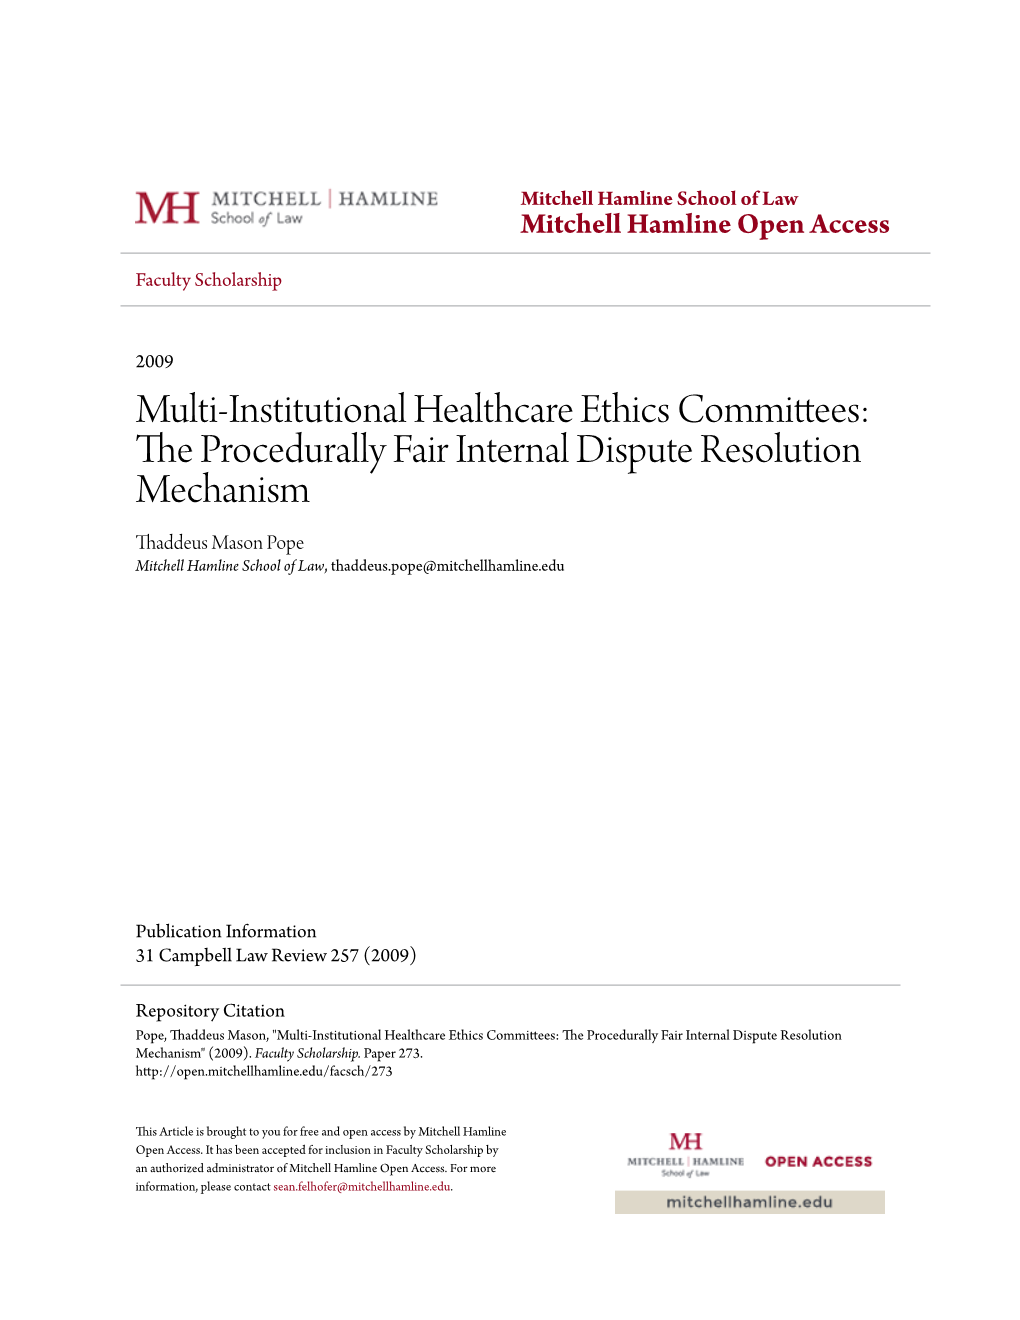 Multi-Institutional Healthcare Ethics Committees